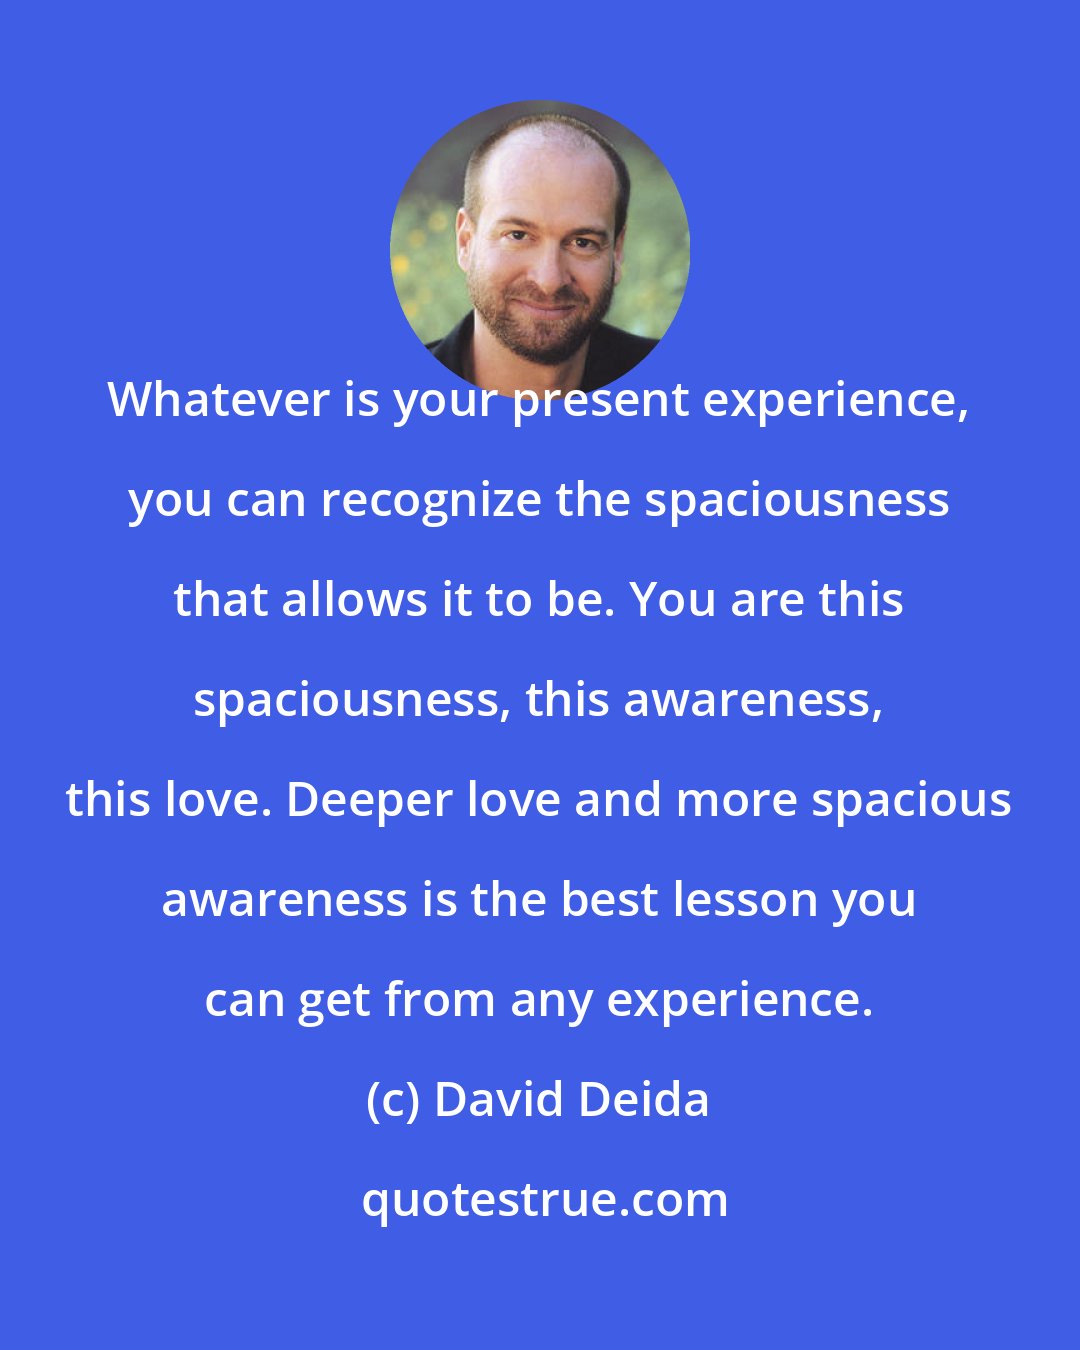 David Deida: Whatever is your present experience, you can recognize the spaciousness that allows it to be. You are this spaciousness, this awareness, this love. Deeper love and more spacious awareness is the best lesson you can get from any experience.